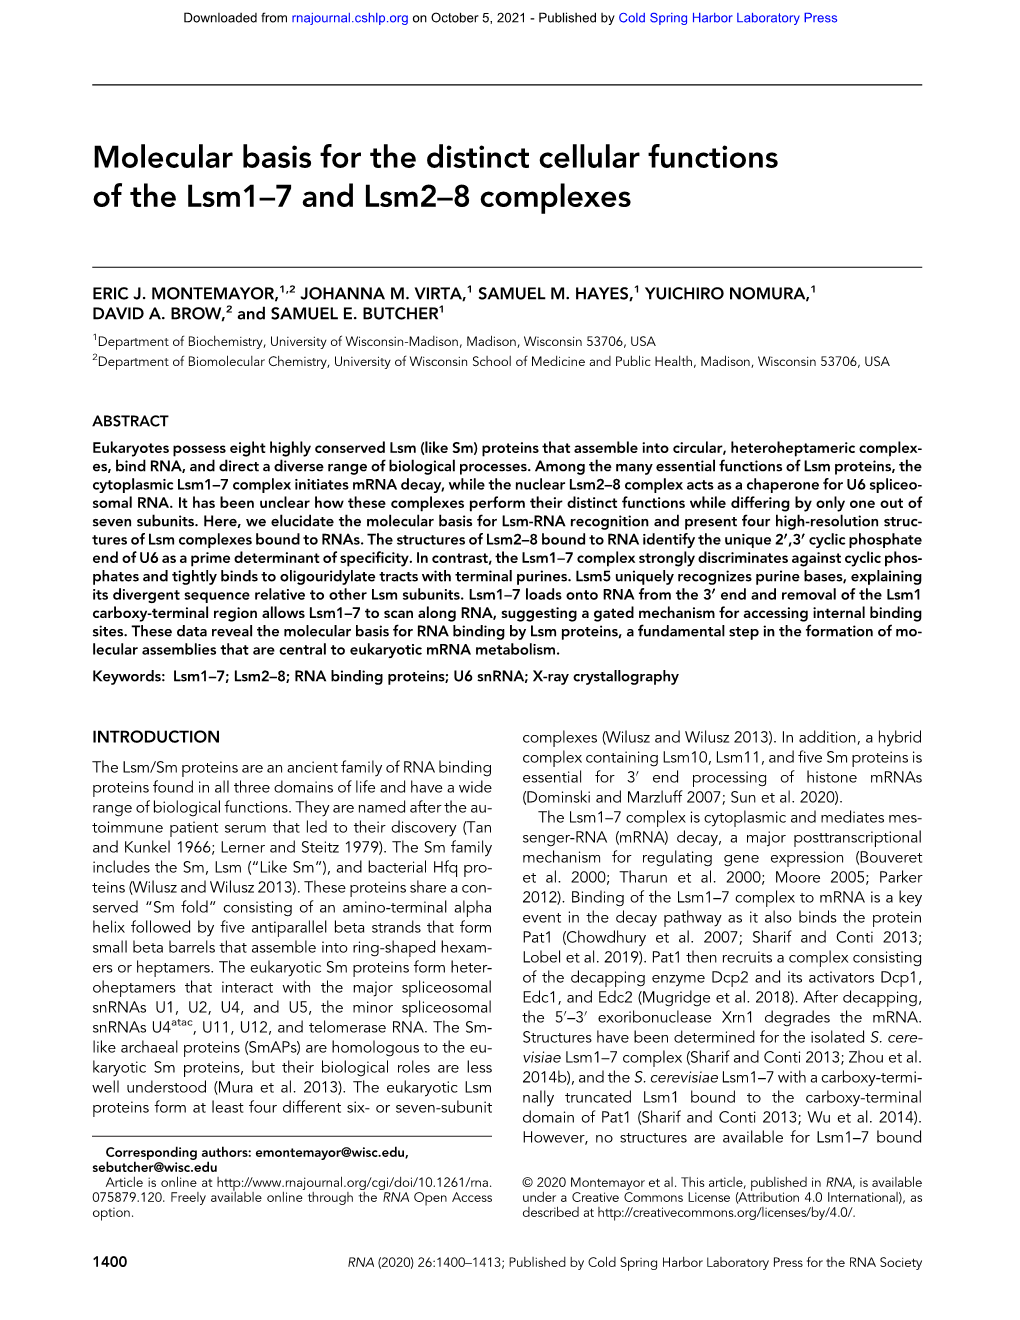 Molecular Basis for the Distinct Cellular Functions of the Lsm1–7 and Lsm2–8 Complexes